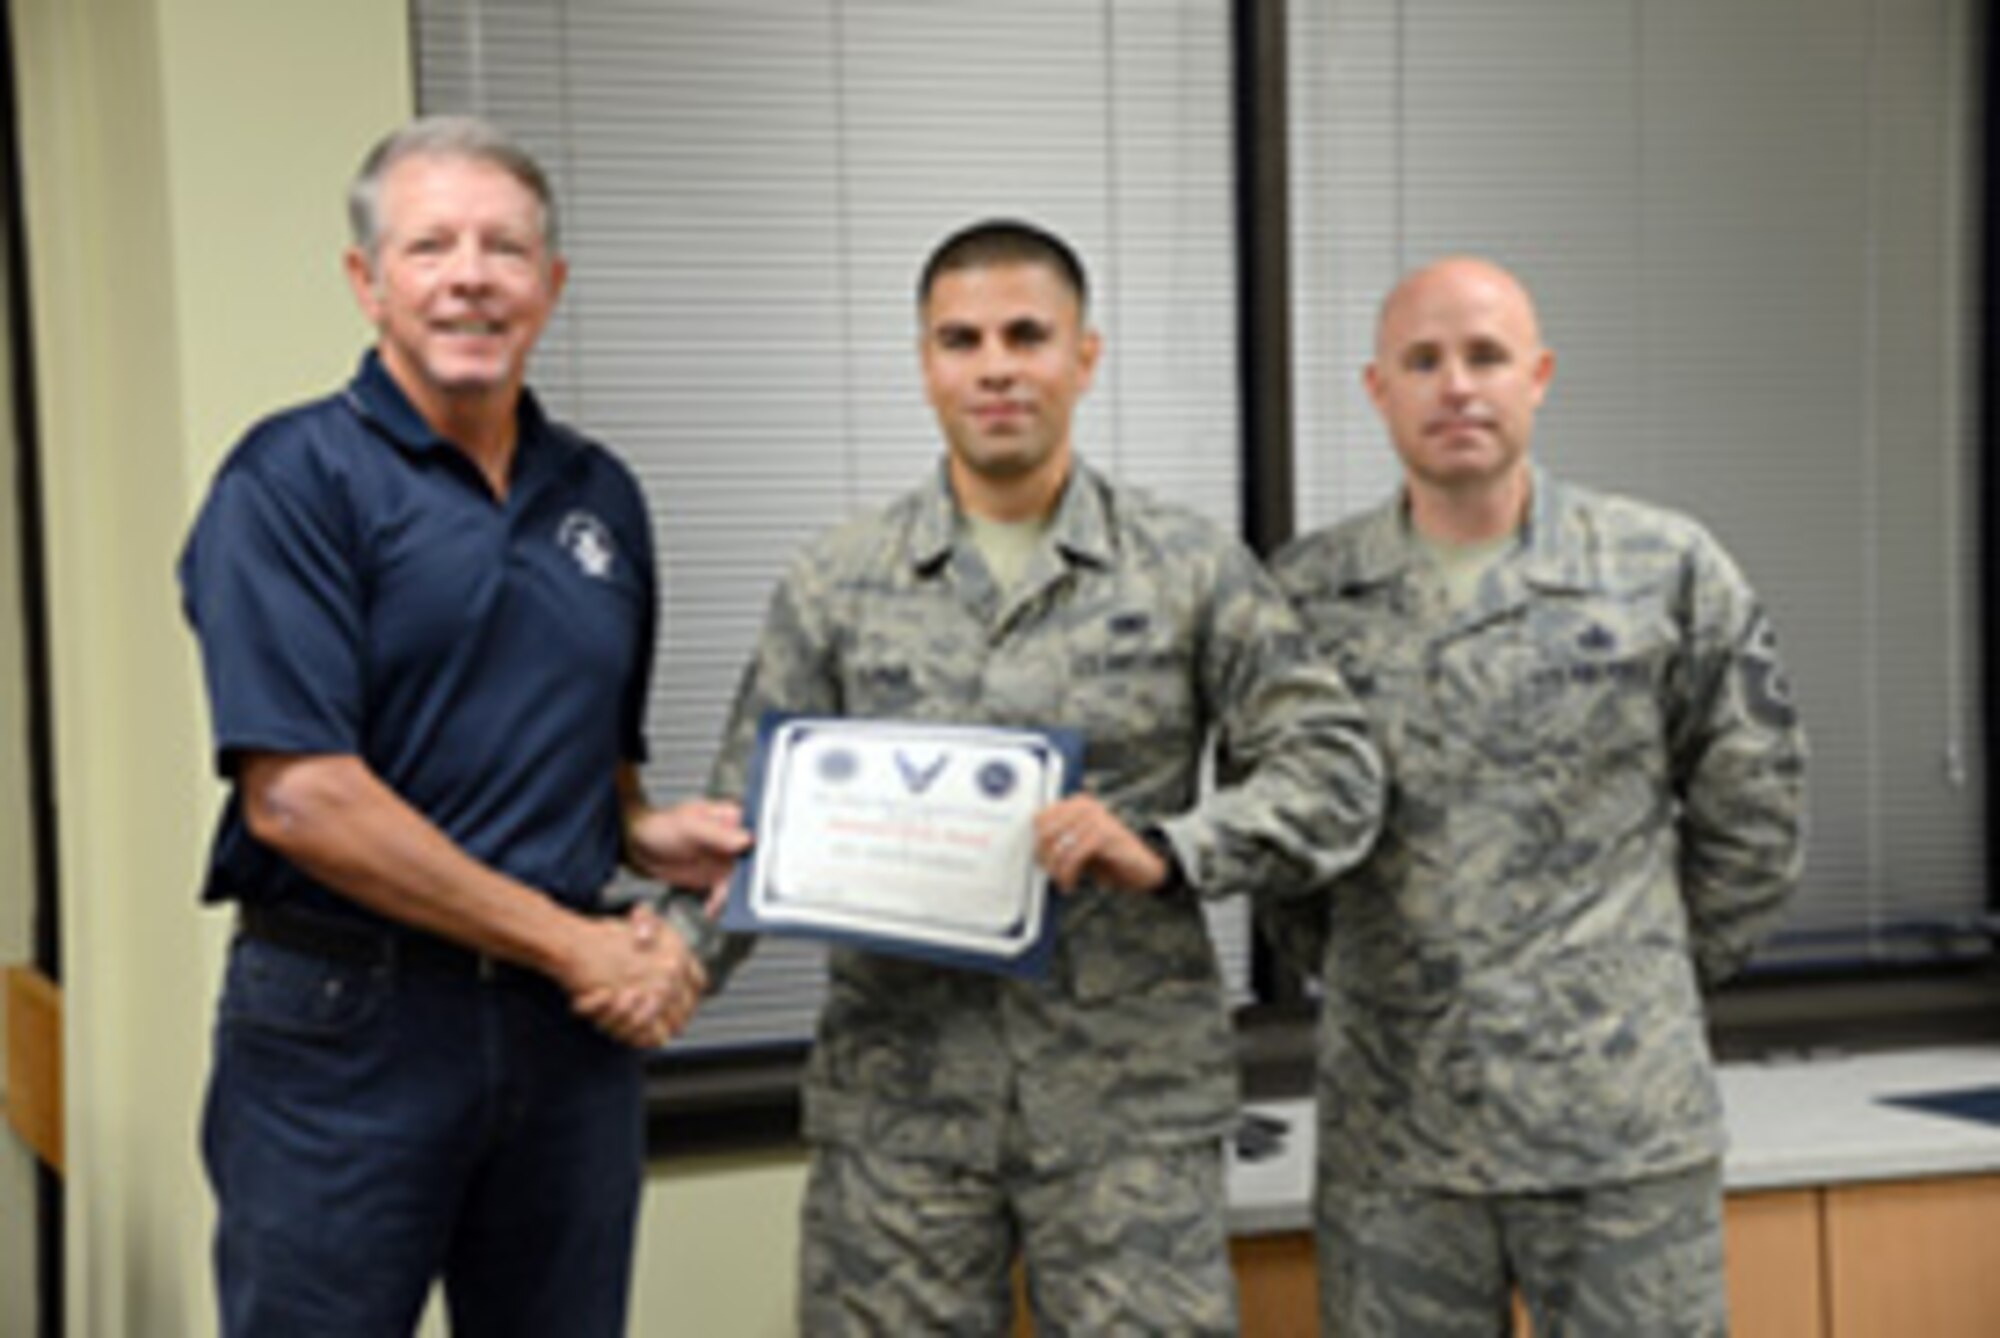 Airman 1st Class Adam Khrais, with the 552nd Maintenance Group, is presented his Diamond Sharp Award by the 15th Chief Master Sgt. of the Air Force Rodney McKinley and his first sergeant, Master Sgt. Paul Barentine.